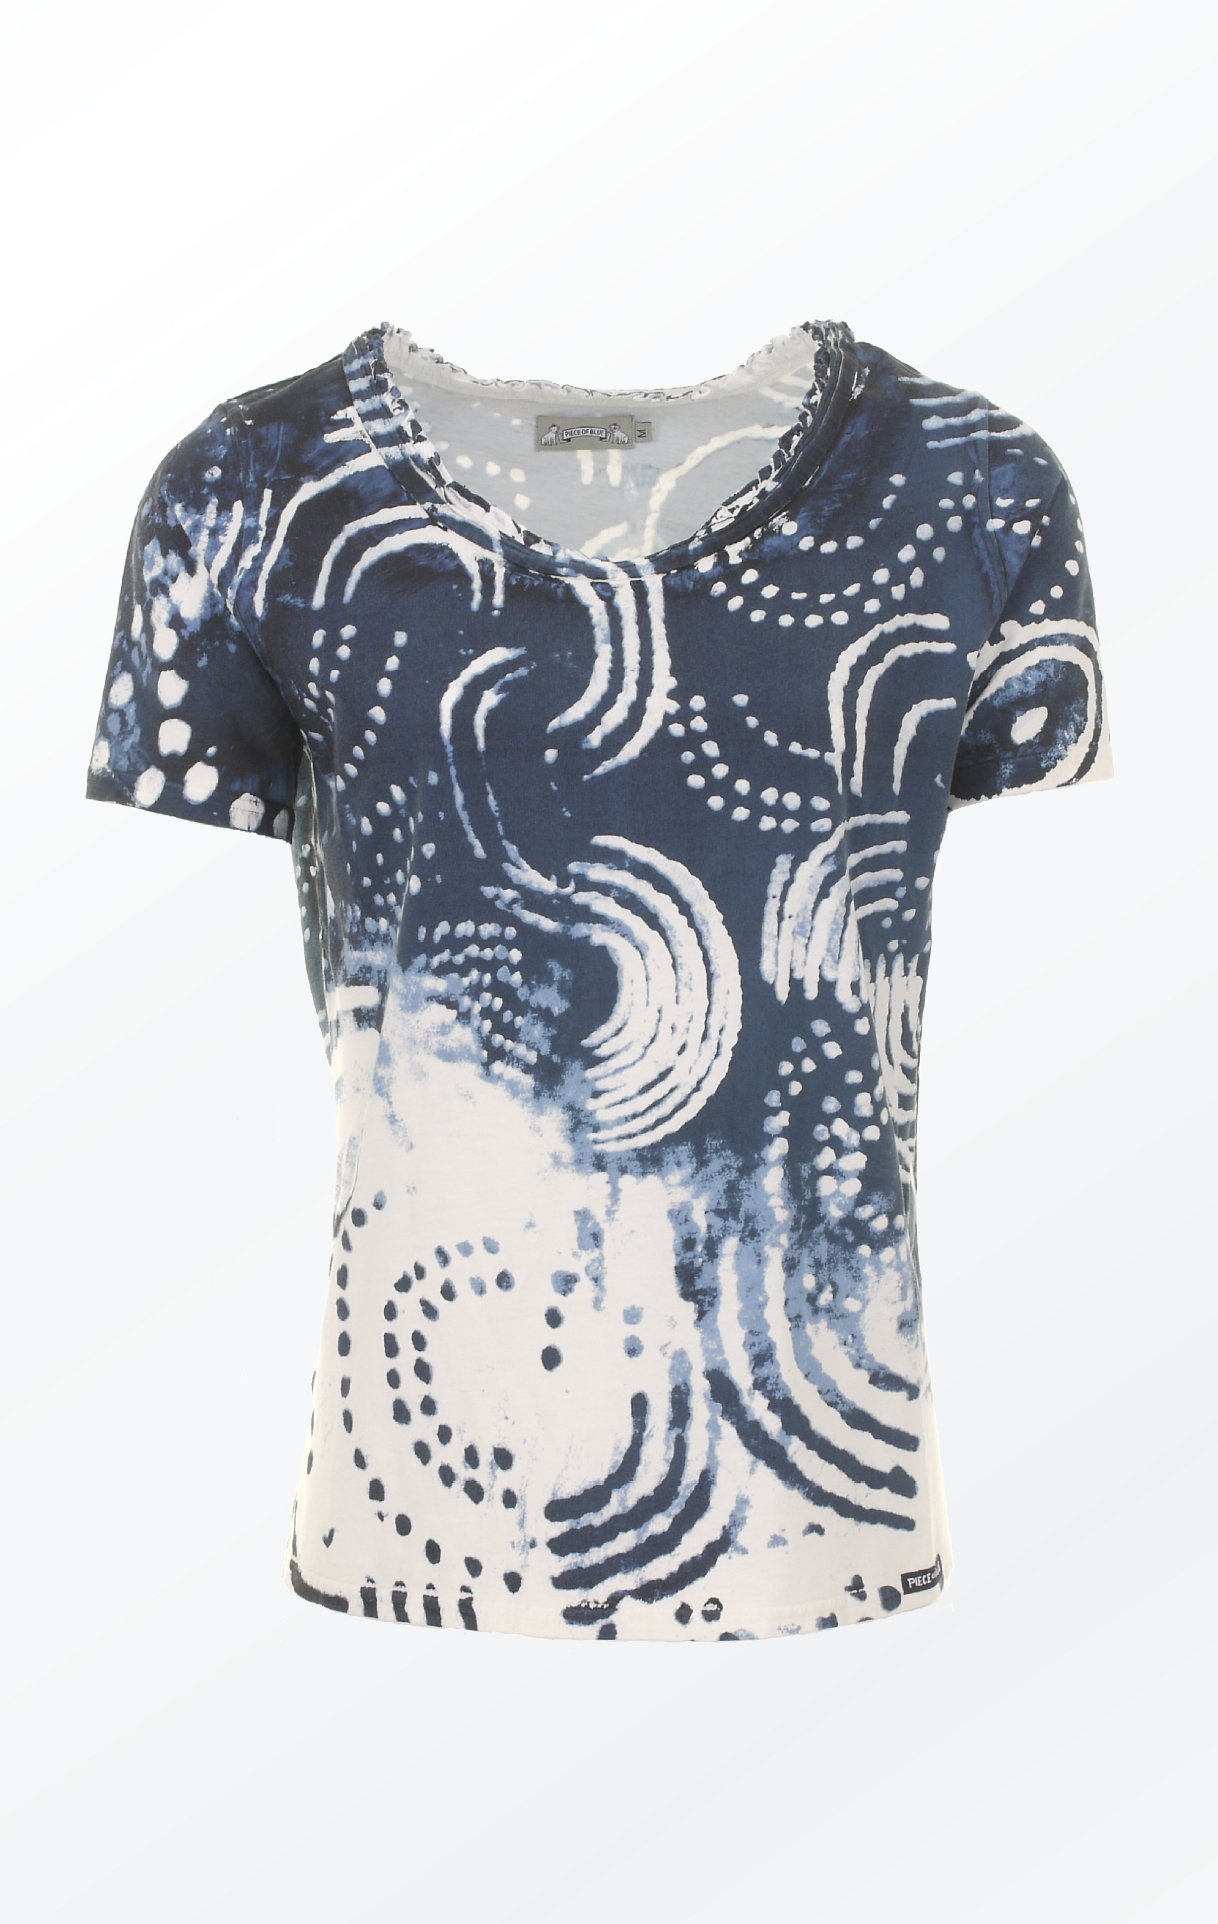 MARINE BLUE AND WHITE T-SHIRT WITH PRETTY ABSTRACT PRINT - PATTERNED ...